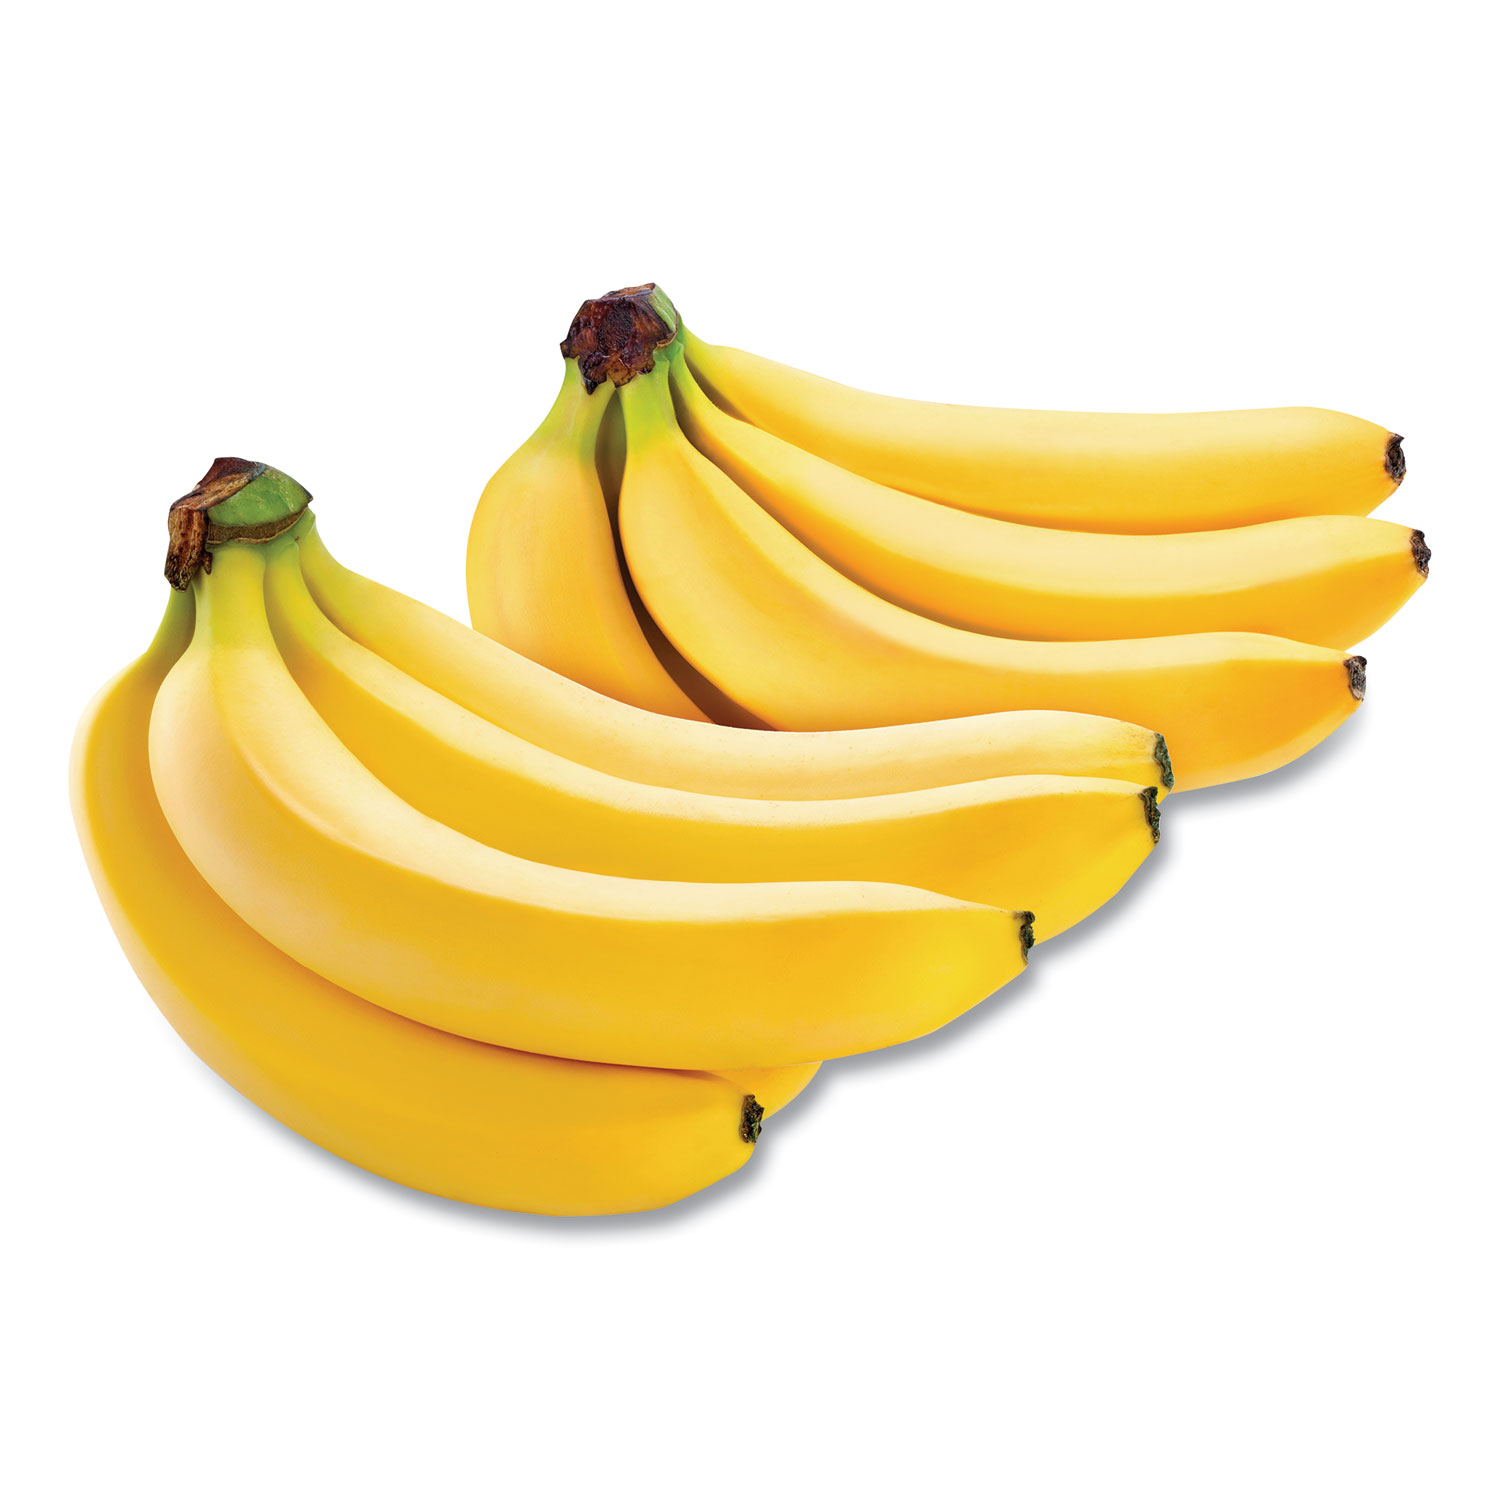  National Brand 105832 Fresh Organic Bananas, 6 lbs, 2 Bundles/Pack, Free Delivery in 1-4 Business Days (GRR90000107) 